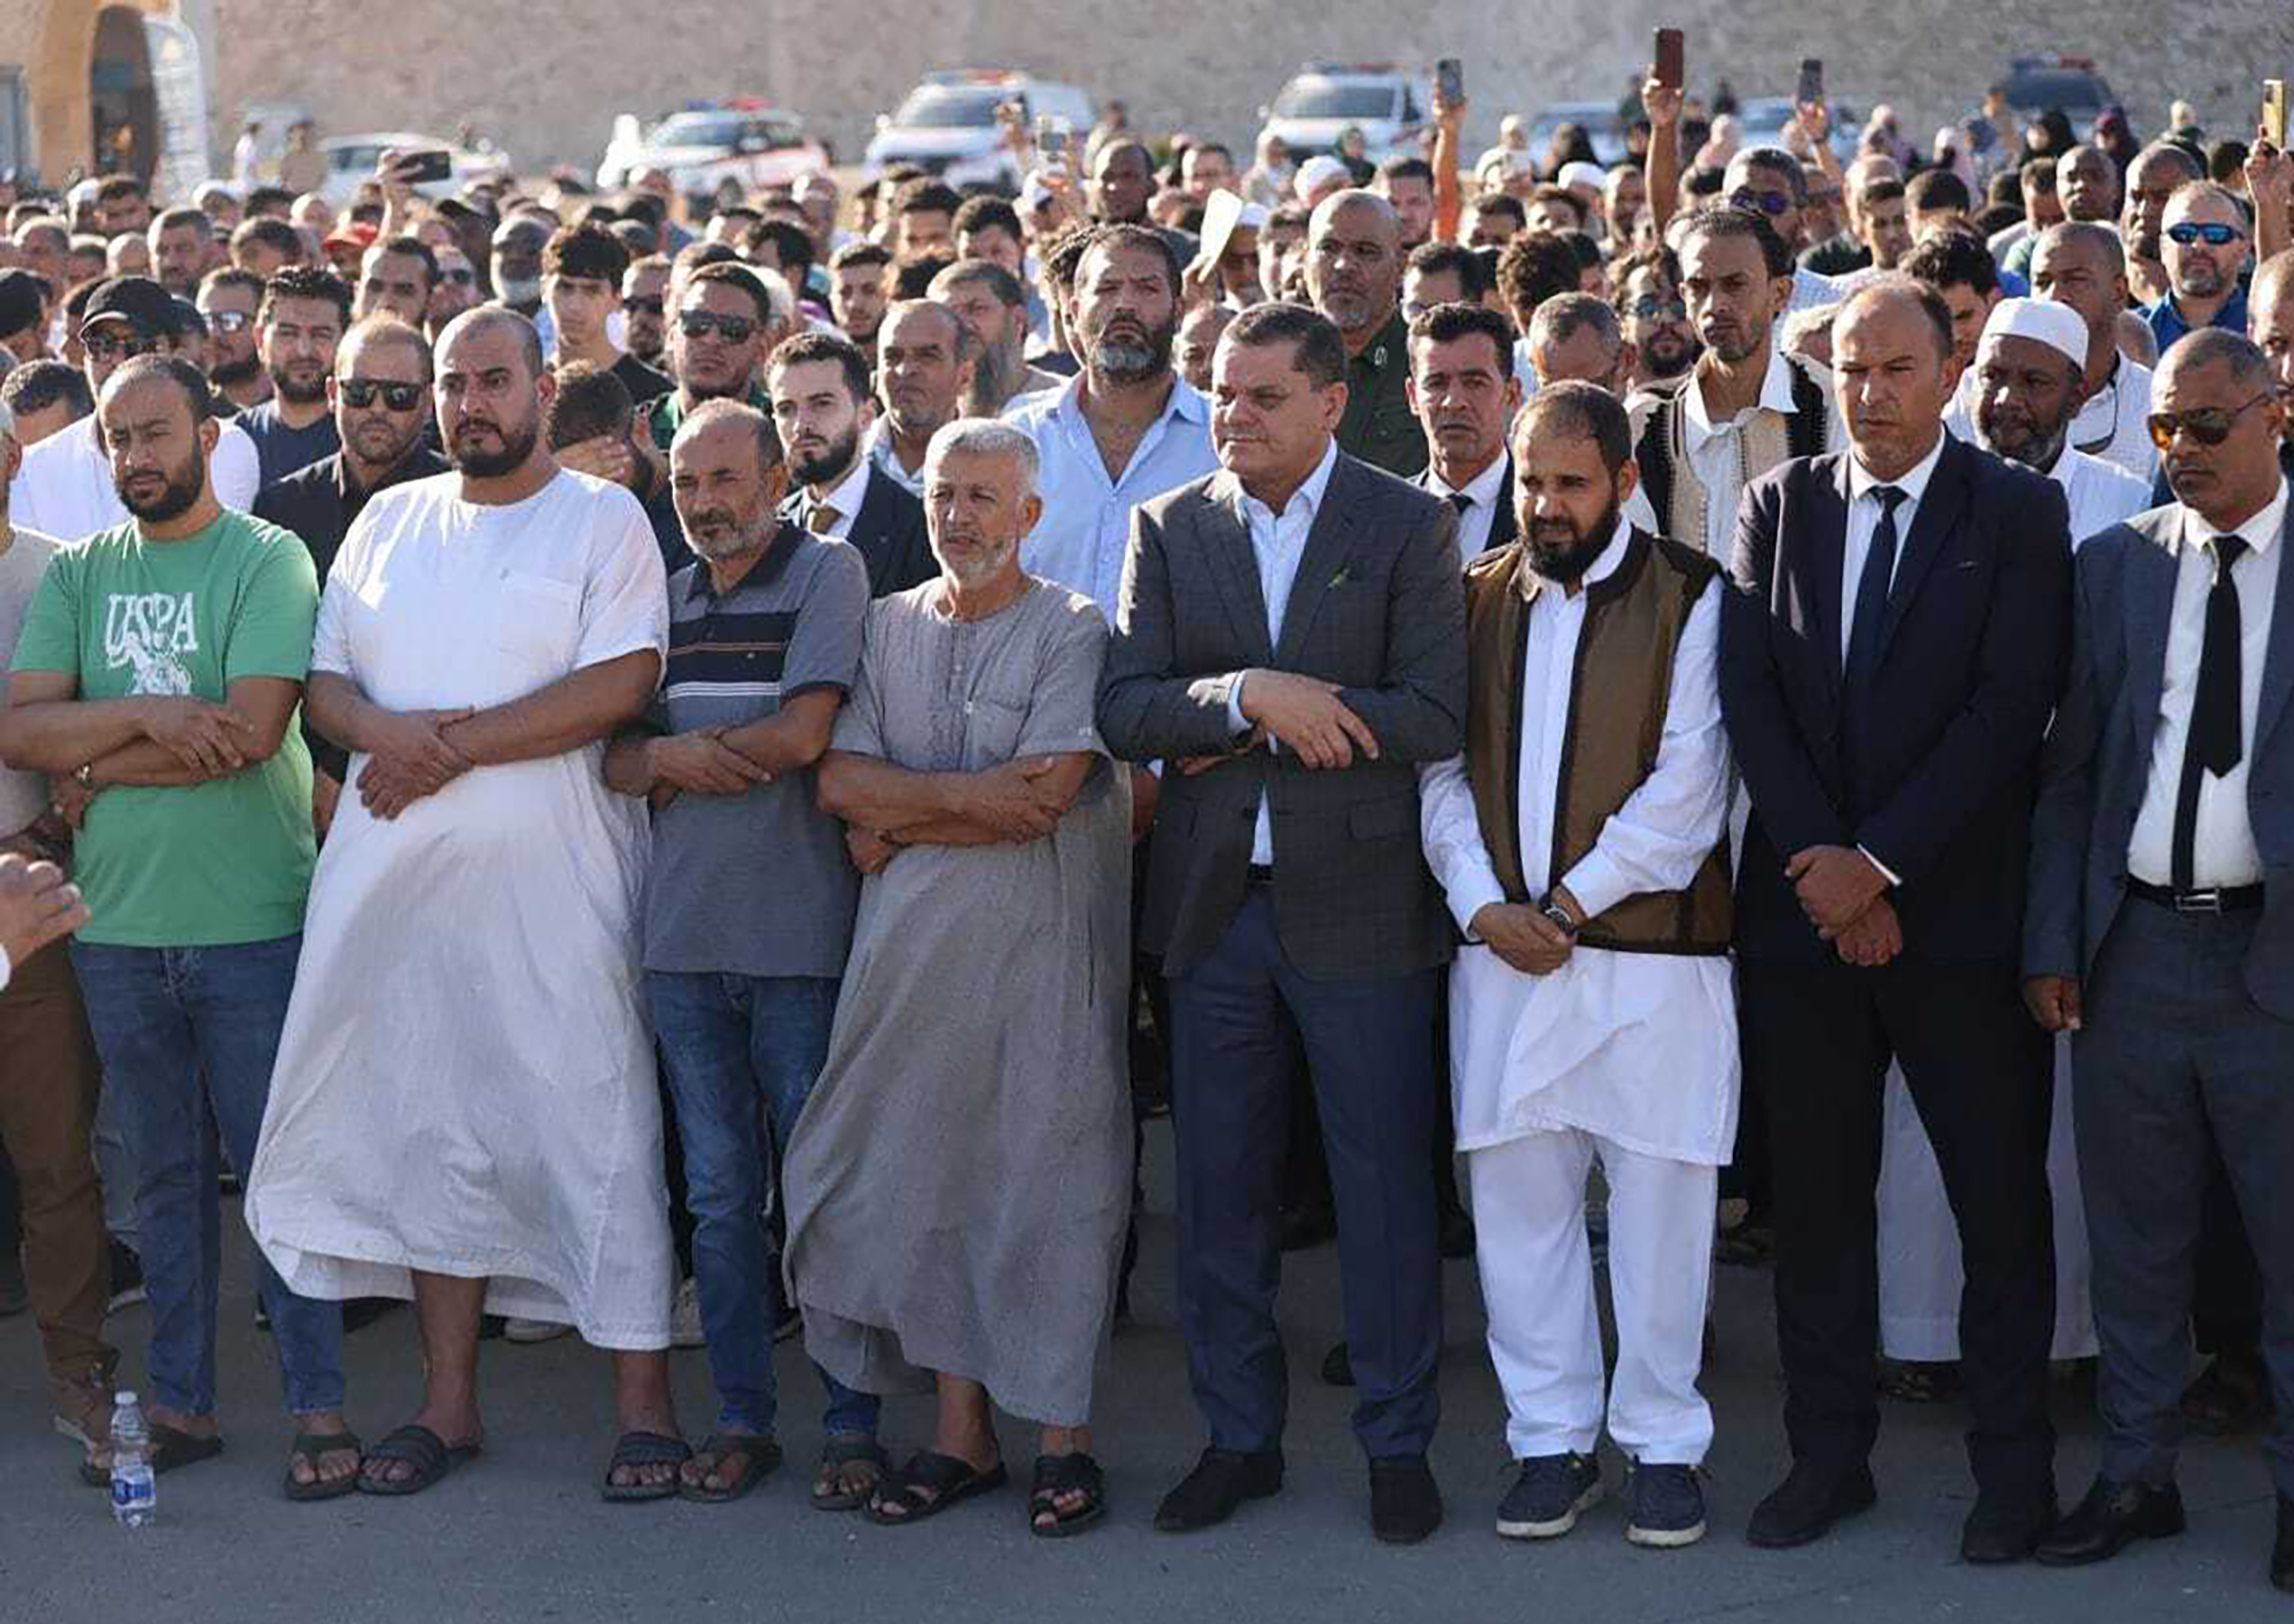 Prime Minister of Libya under the Government of National Unity Abdul Hamid al-Dbeibeh, fourth from right, is seen during a funeral prayer in memory of those who lost their lives due to the flood disaster in the country in Tripoli on Sept. 12. (Libyan Government of National Unity/Anadolu Agency/Getty Images)